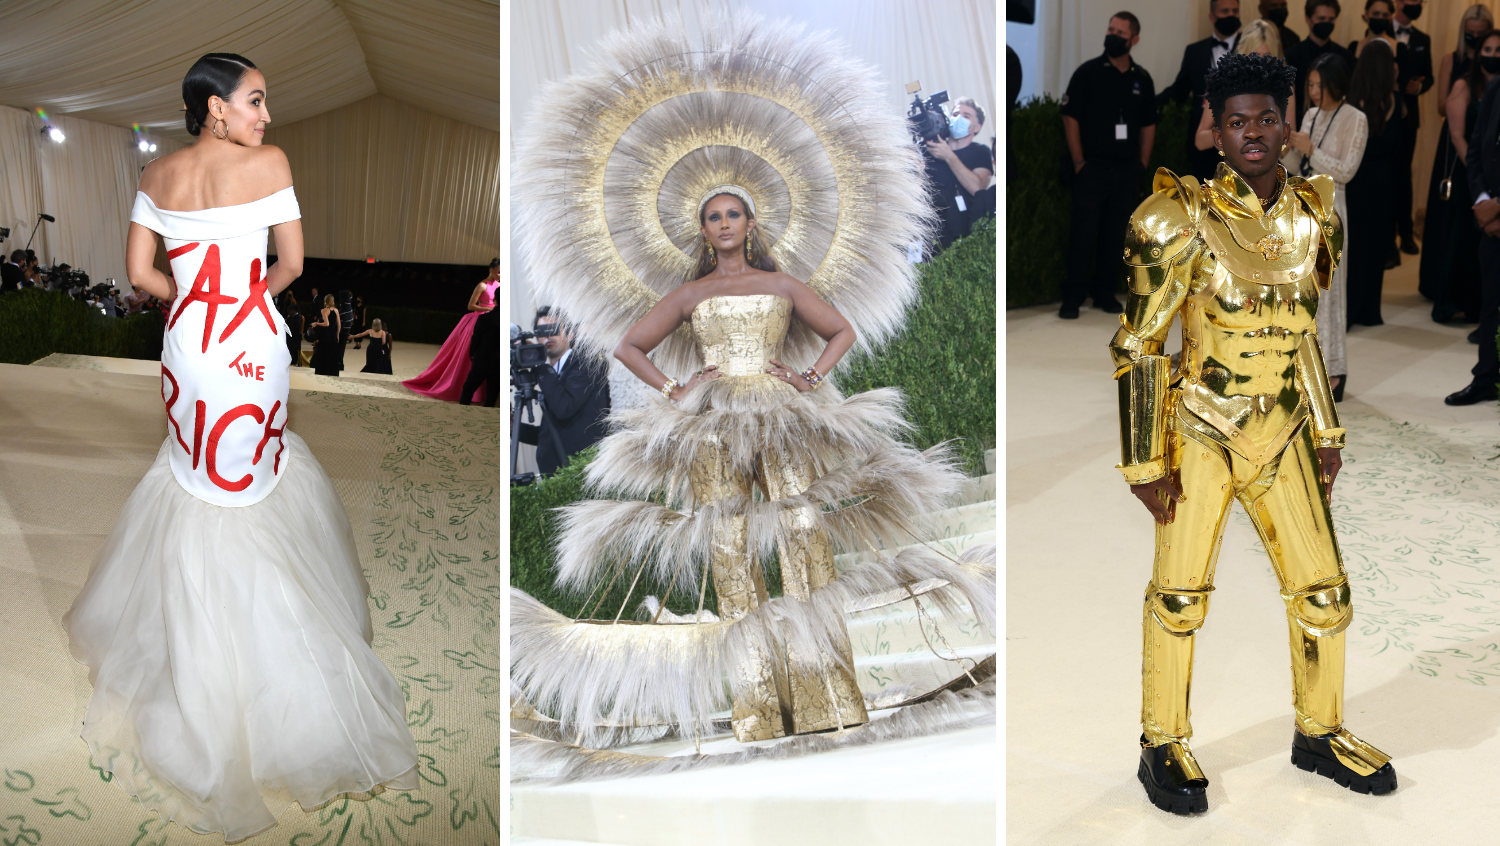 Met Gala 2023: When Is It? What's the Theme? And More Questions